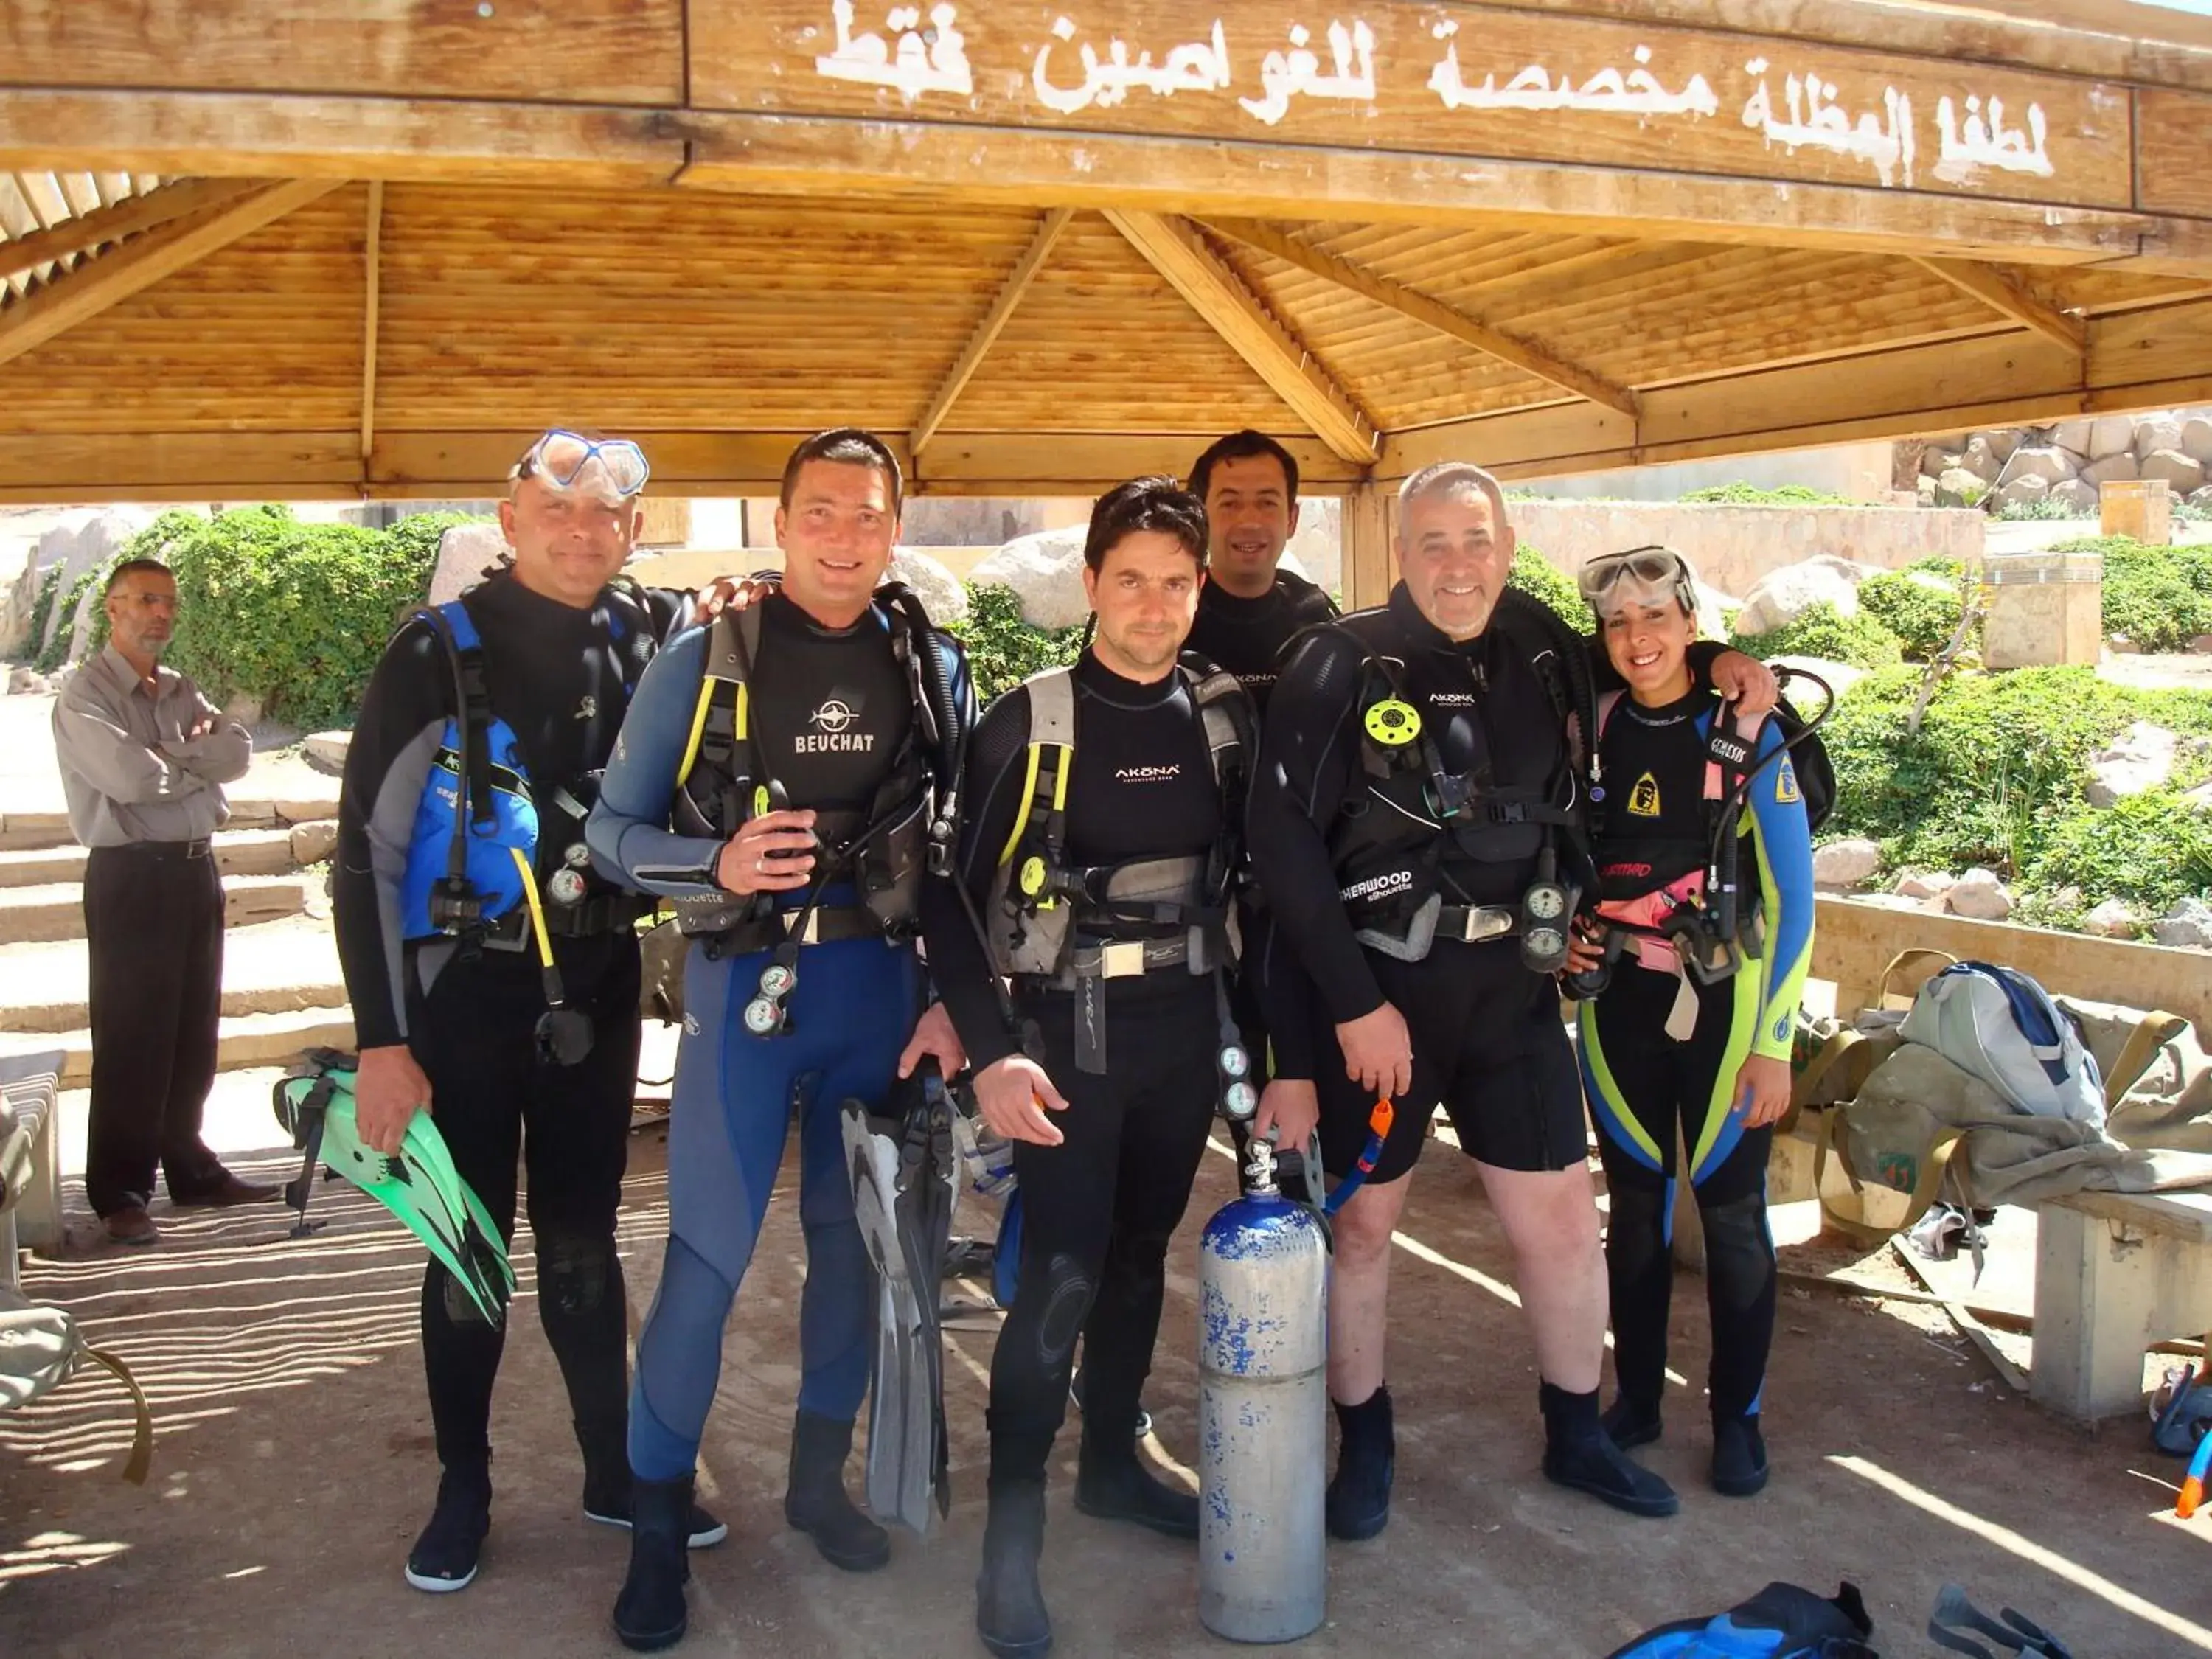 Diving in Red Sea Dive Center